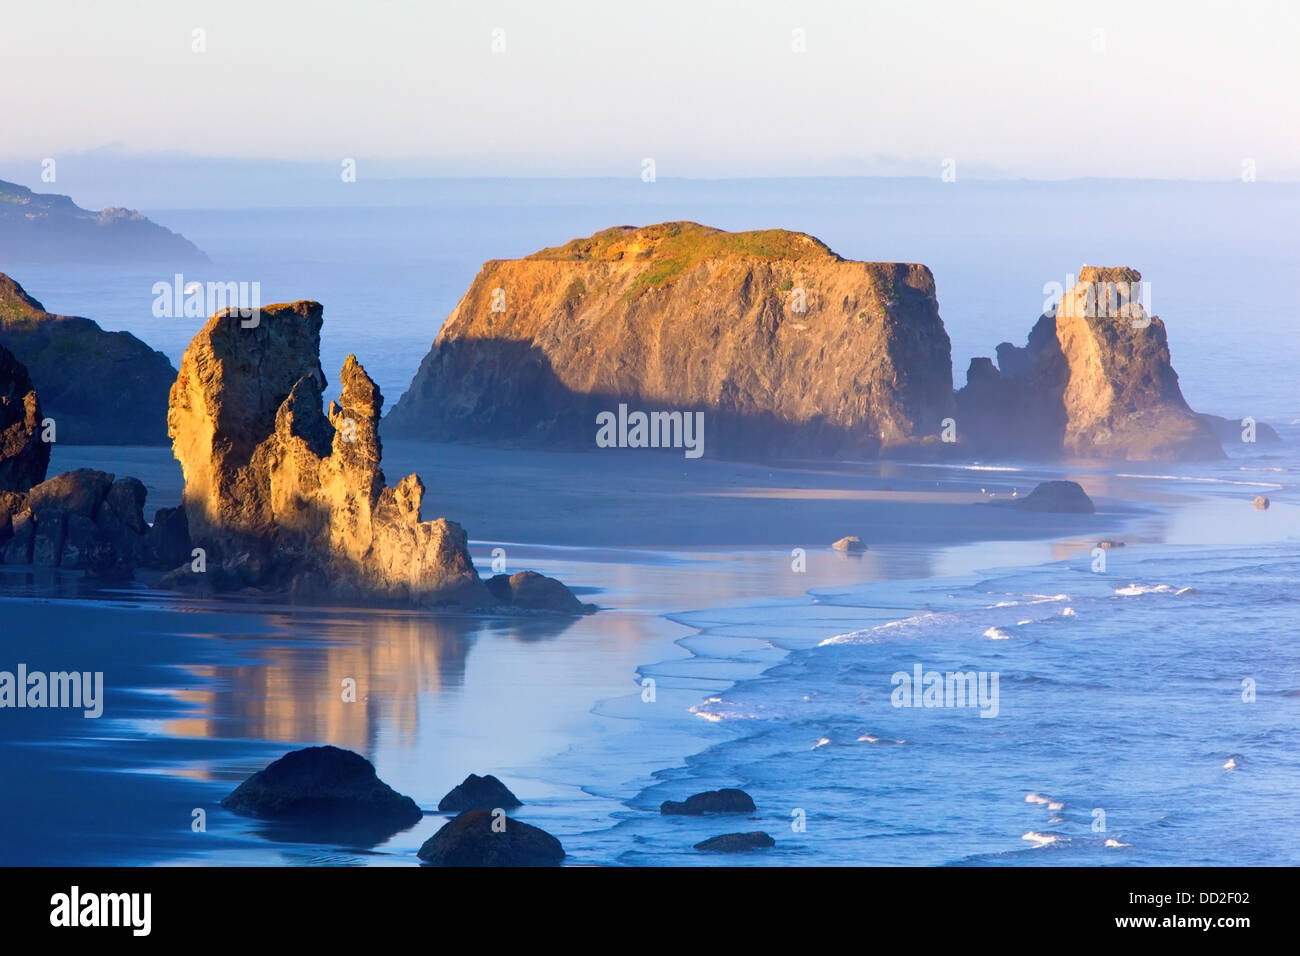 Morning Light Adds Beauty To Fog Covered Rock Formations At Bandon State Park; Bandon, Oregon, United States of America Stock Photo